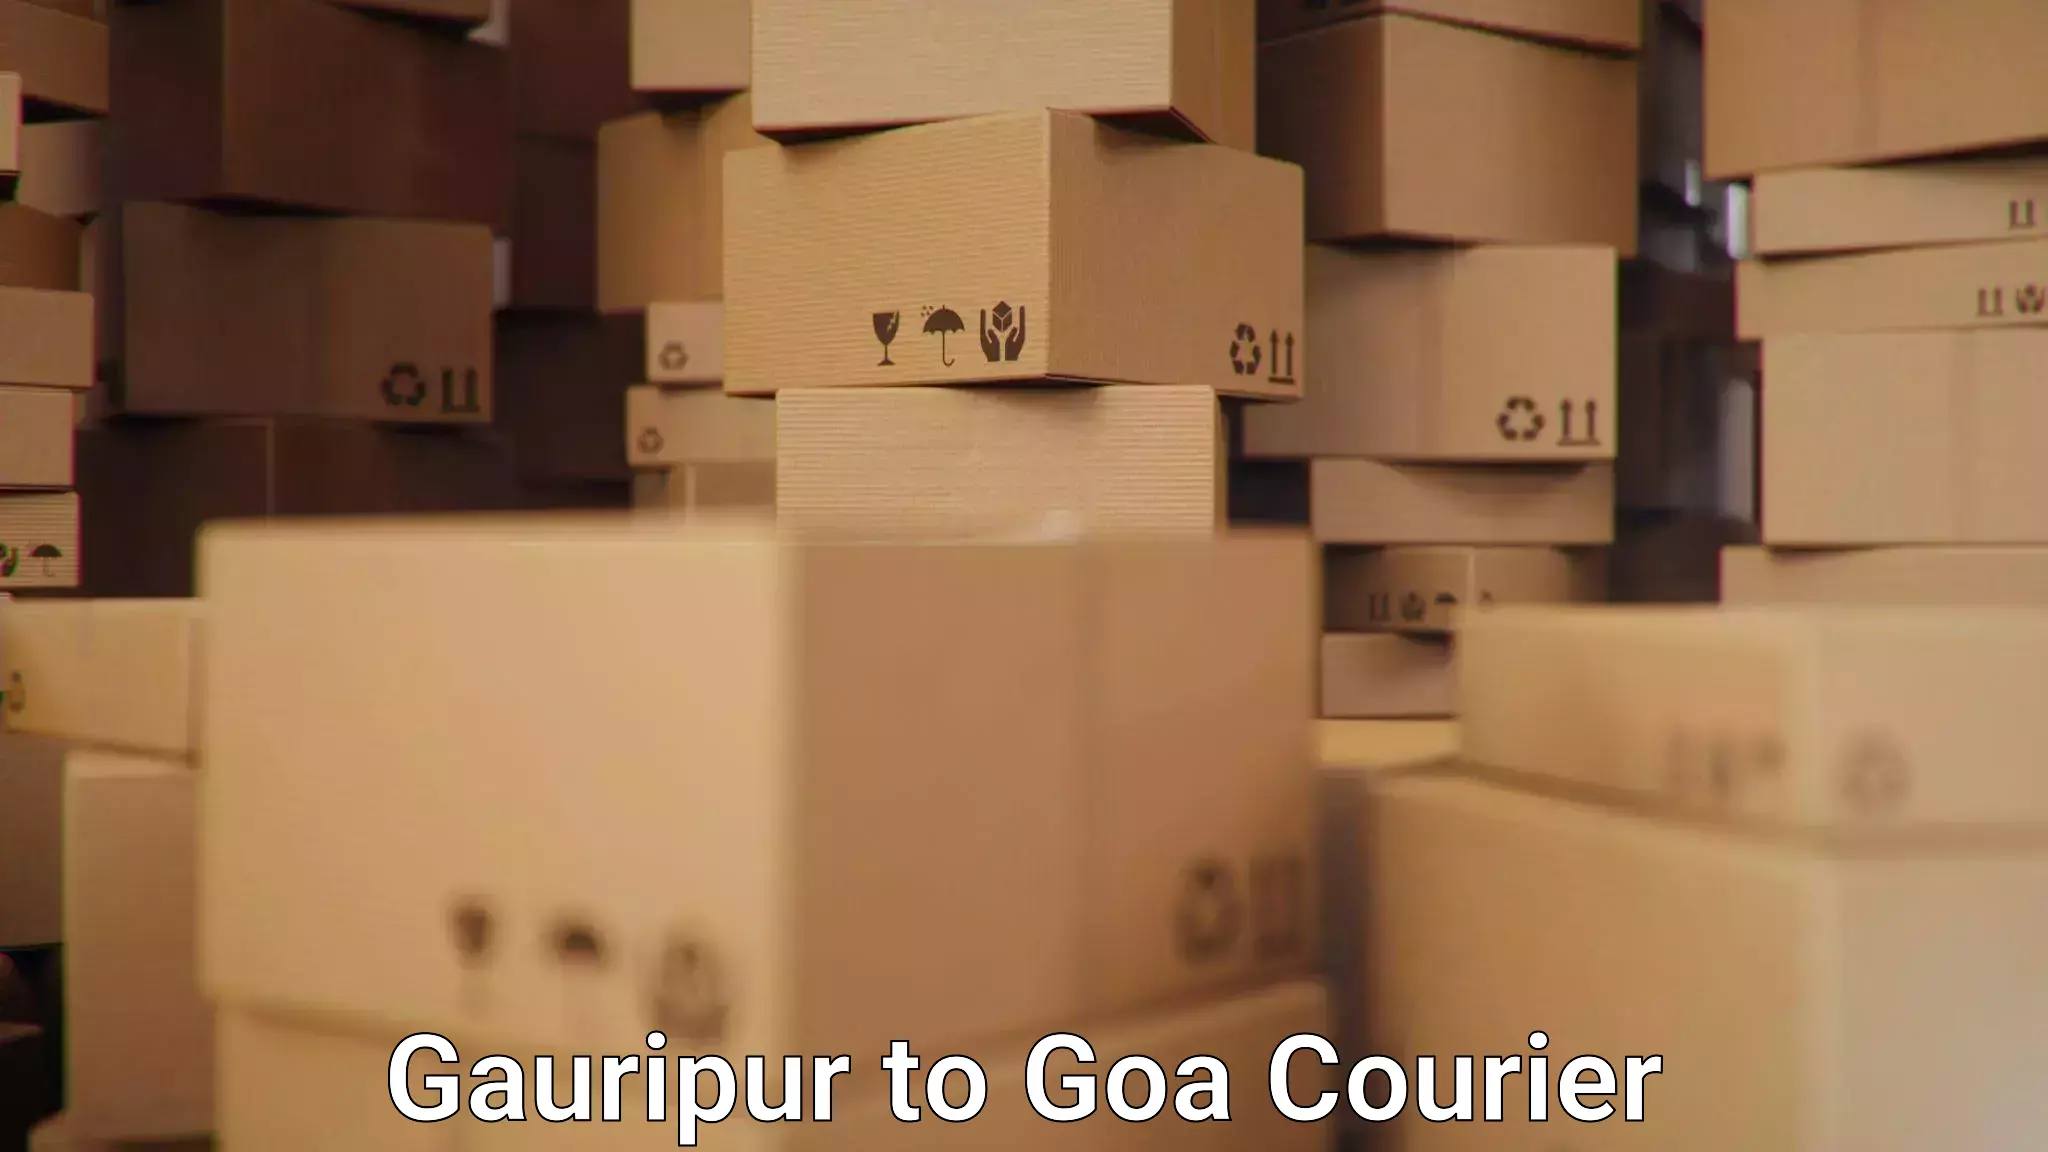 Quick dispatch service Gauripur to South Goa